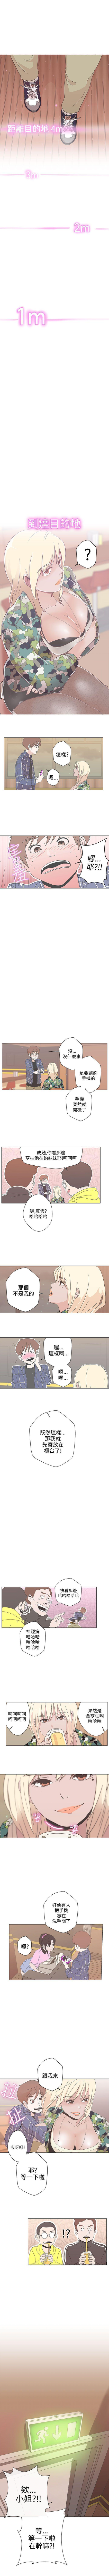 Ngentot LOVE 愛的導航G 1-55 Doggy - Page 6